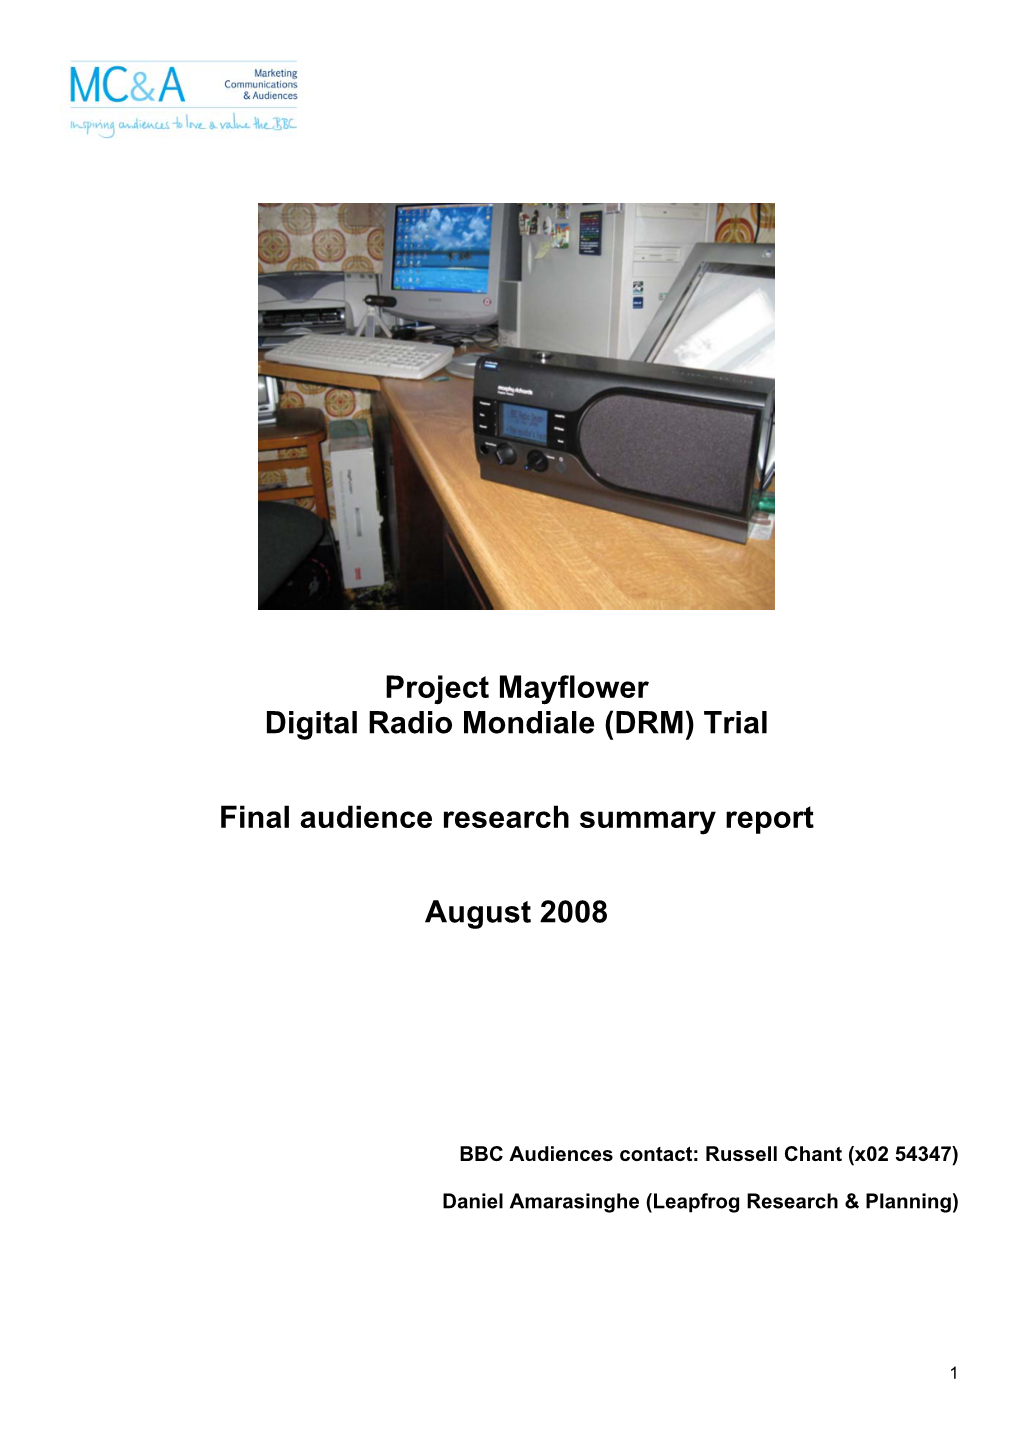 Project Mayflower Digital Radio Mondiale (DRM) Trial Final Audience Research Summary Report August 2008